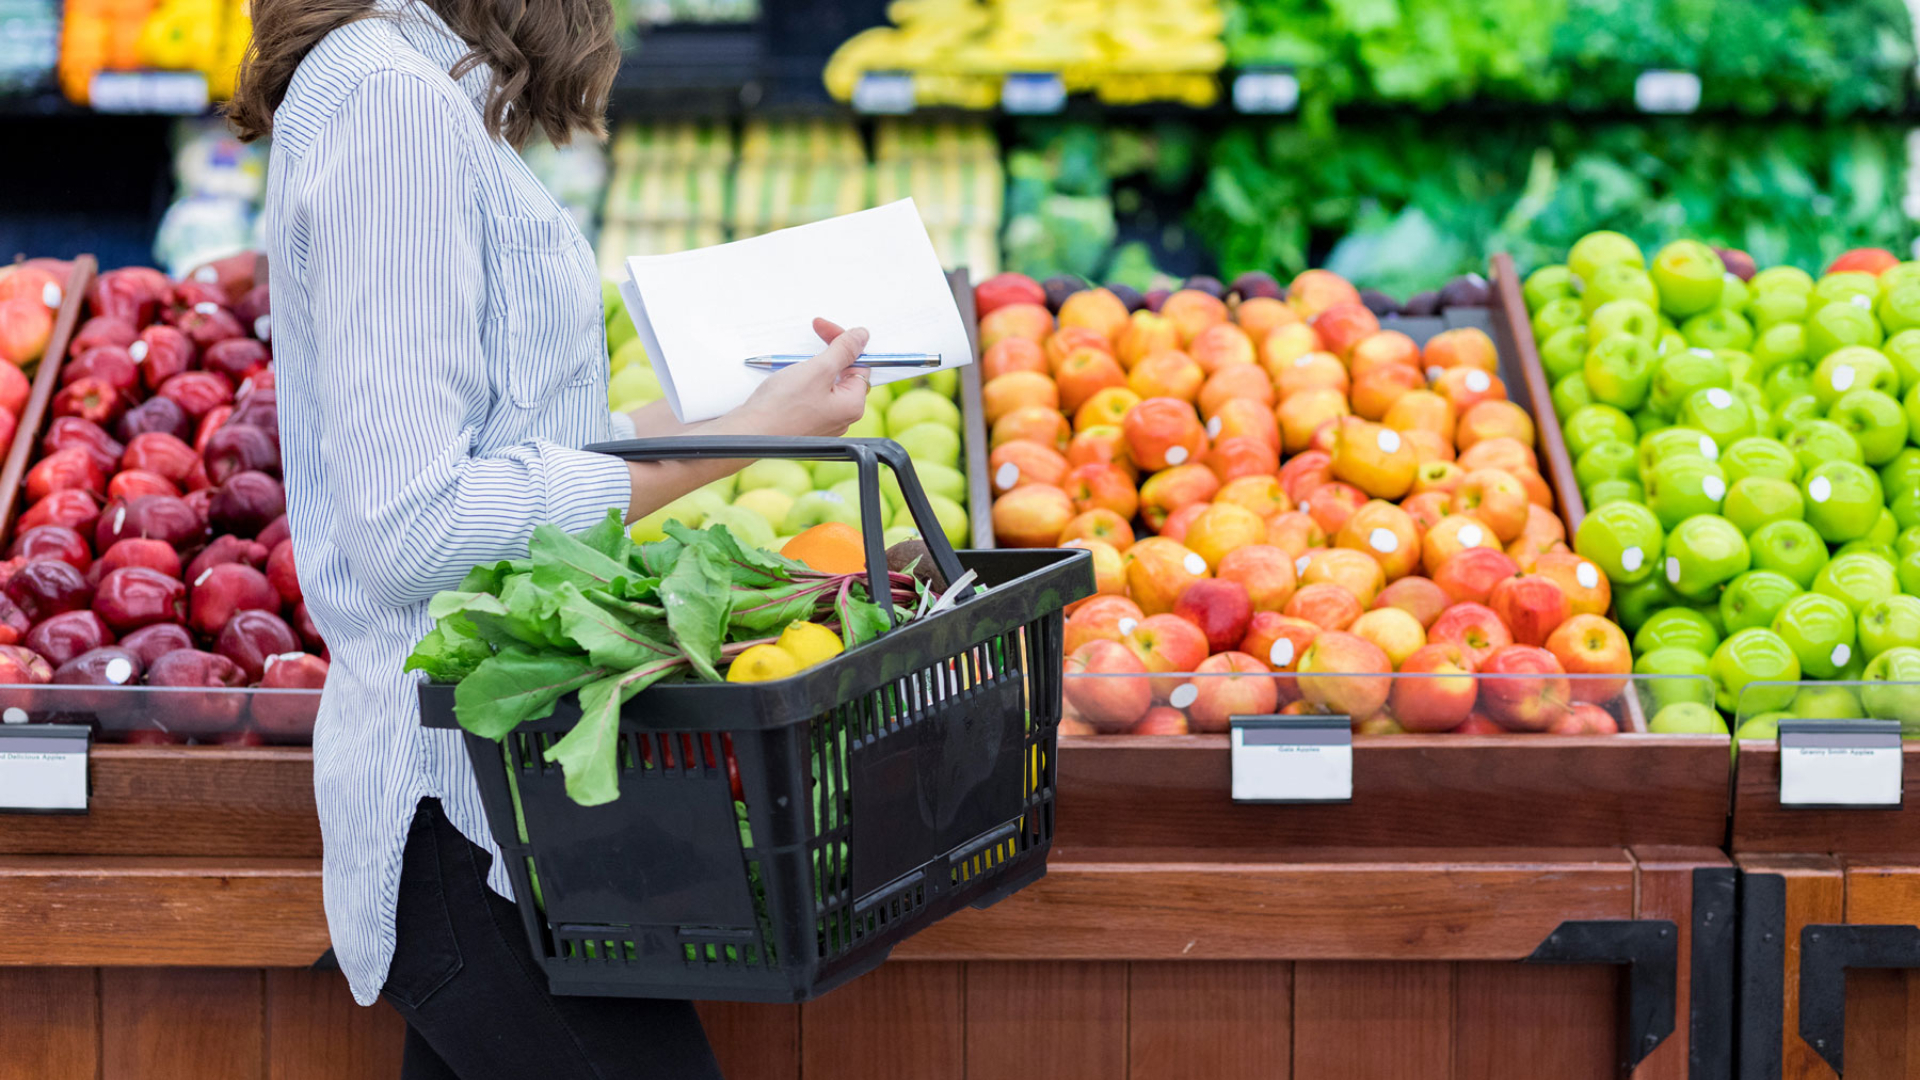 Here's how to save money on your healthy grocery bill